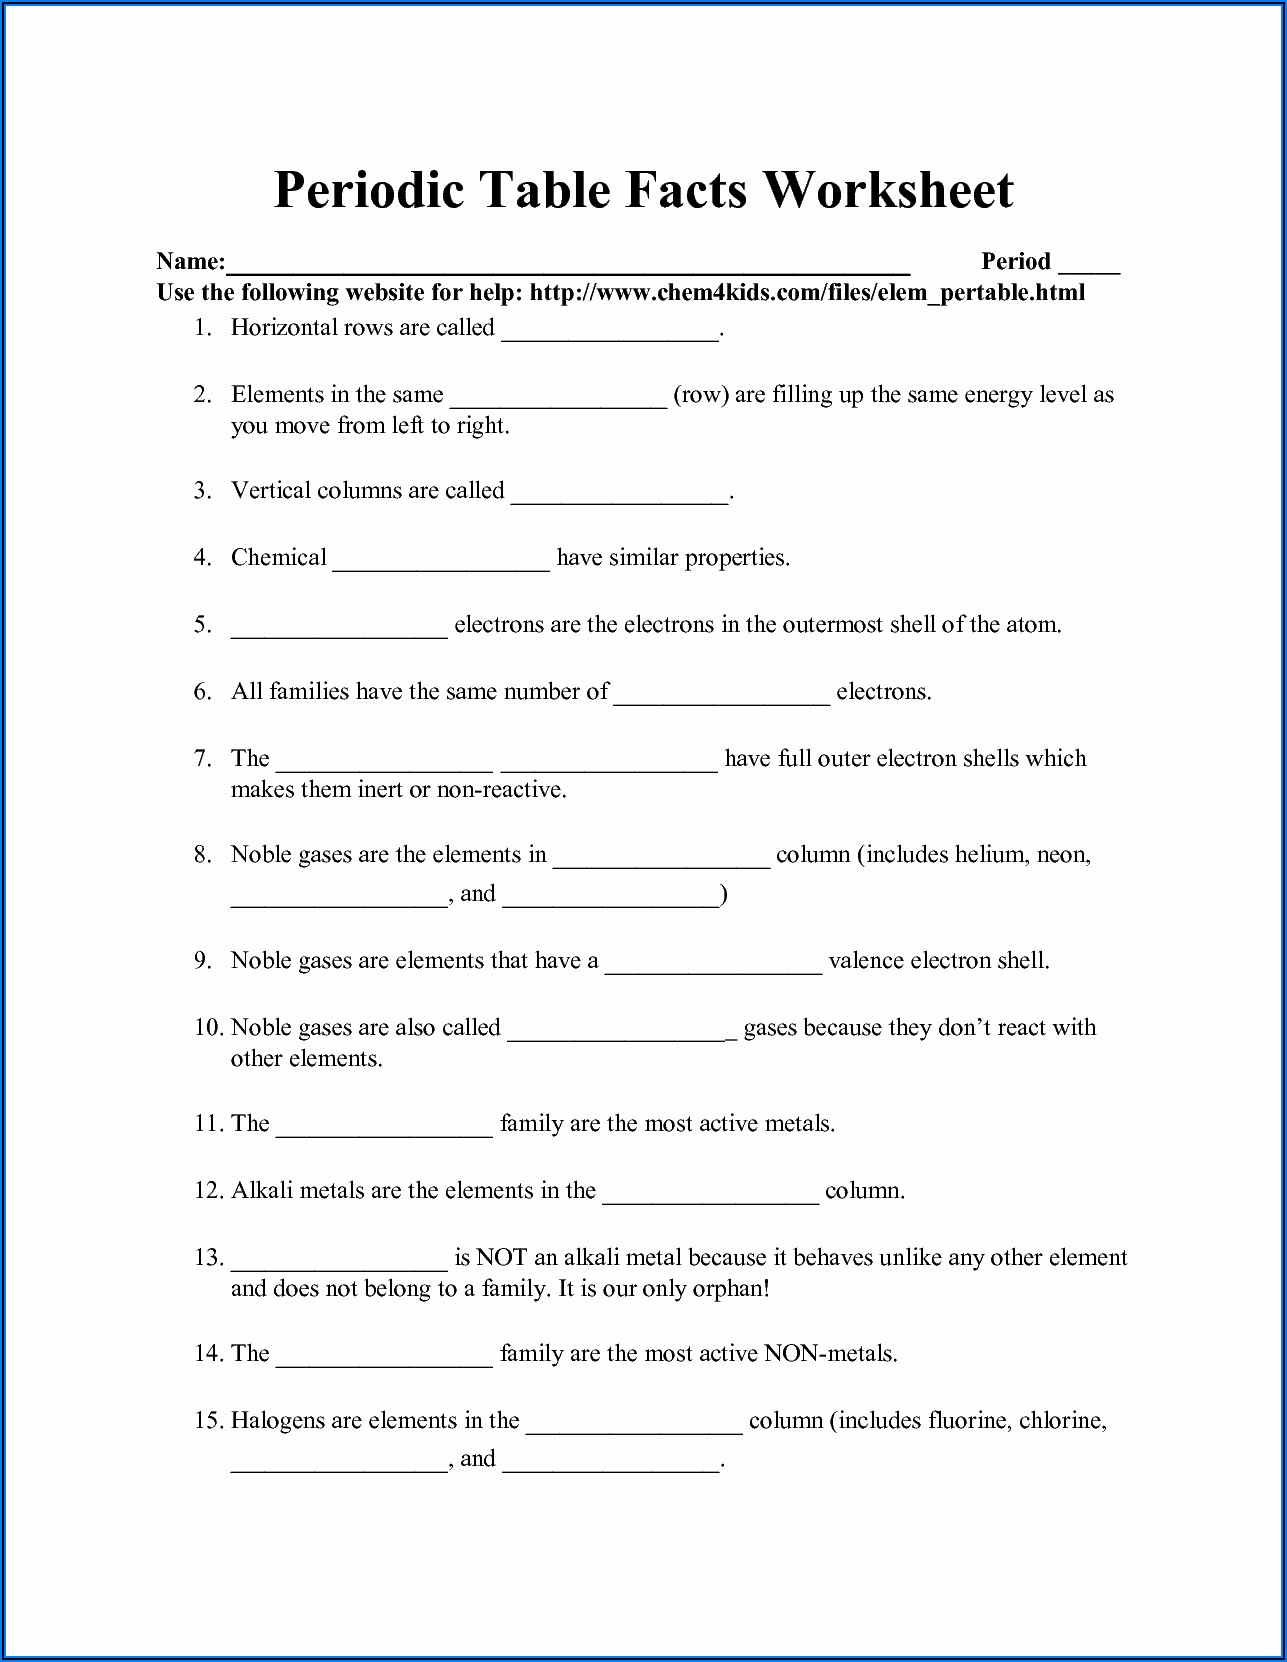 Worksheet For Periodic Table Of Elements